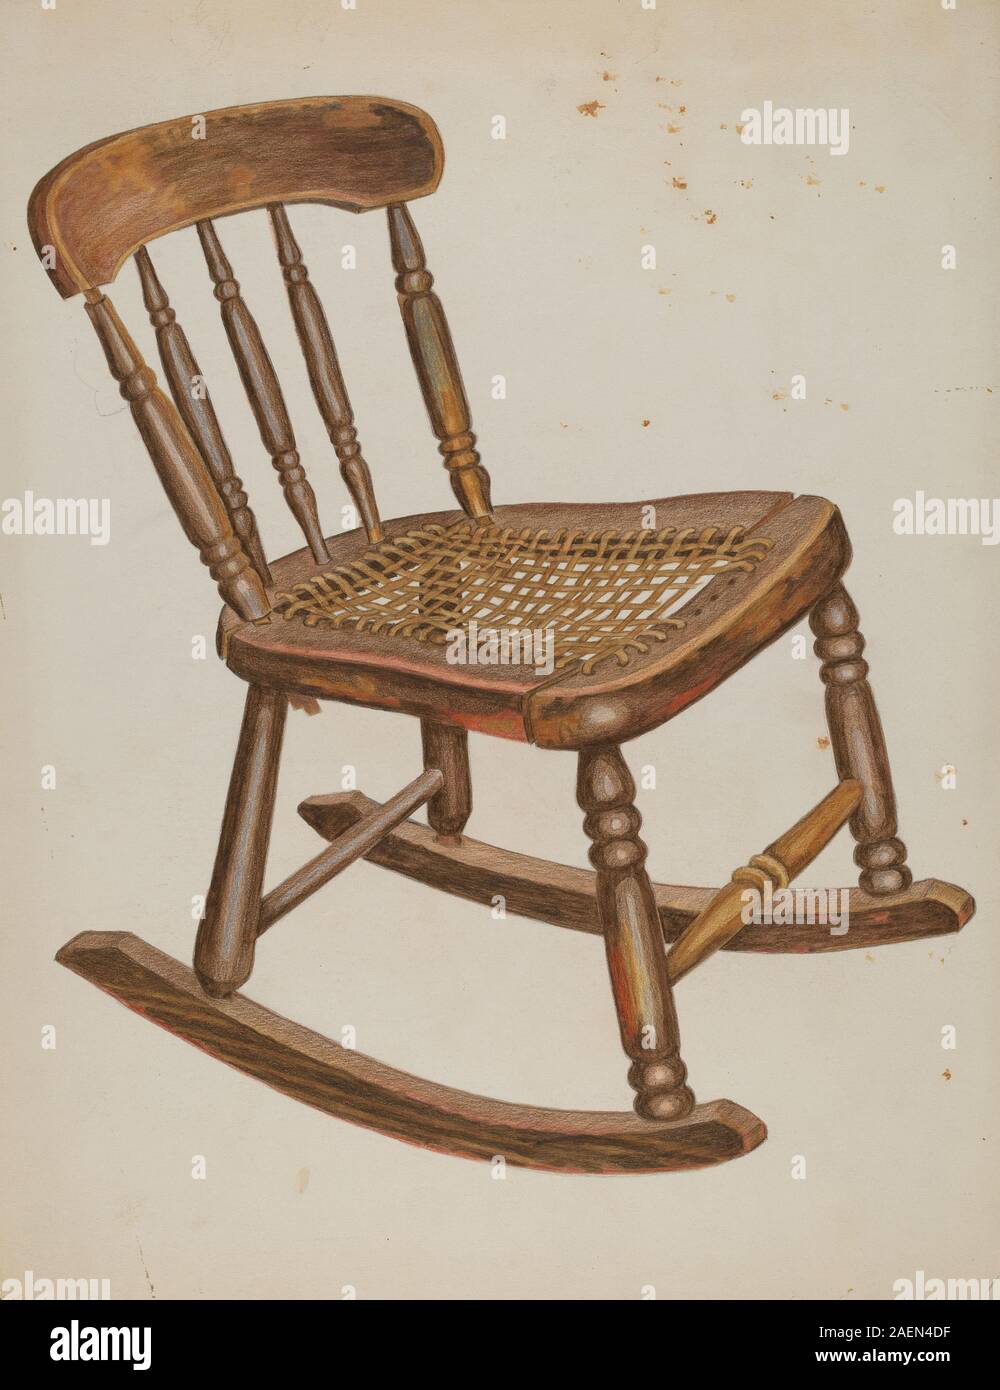 simon weiss rocking chair small child's 1937 rocking